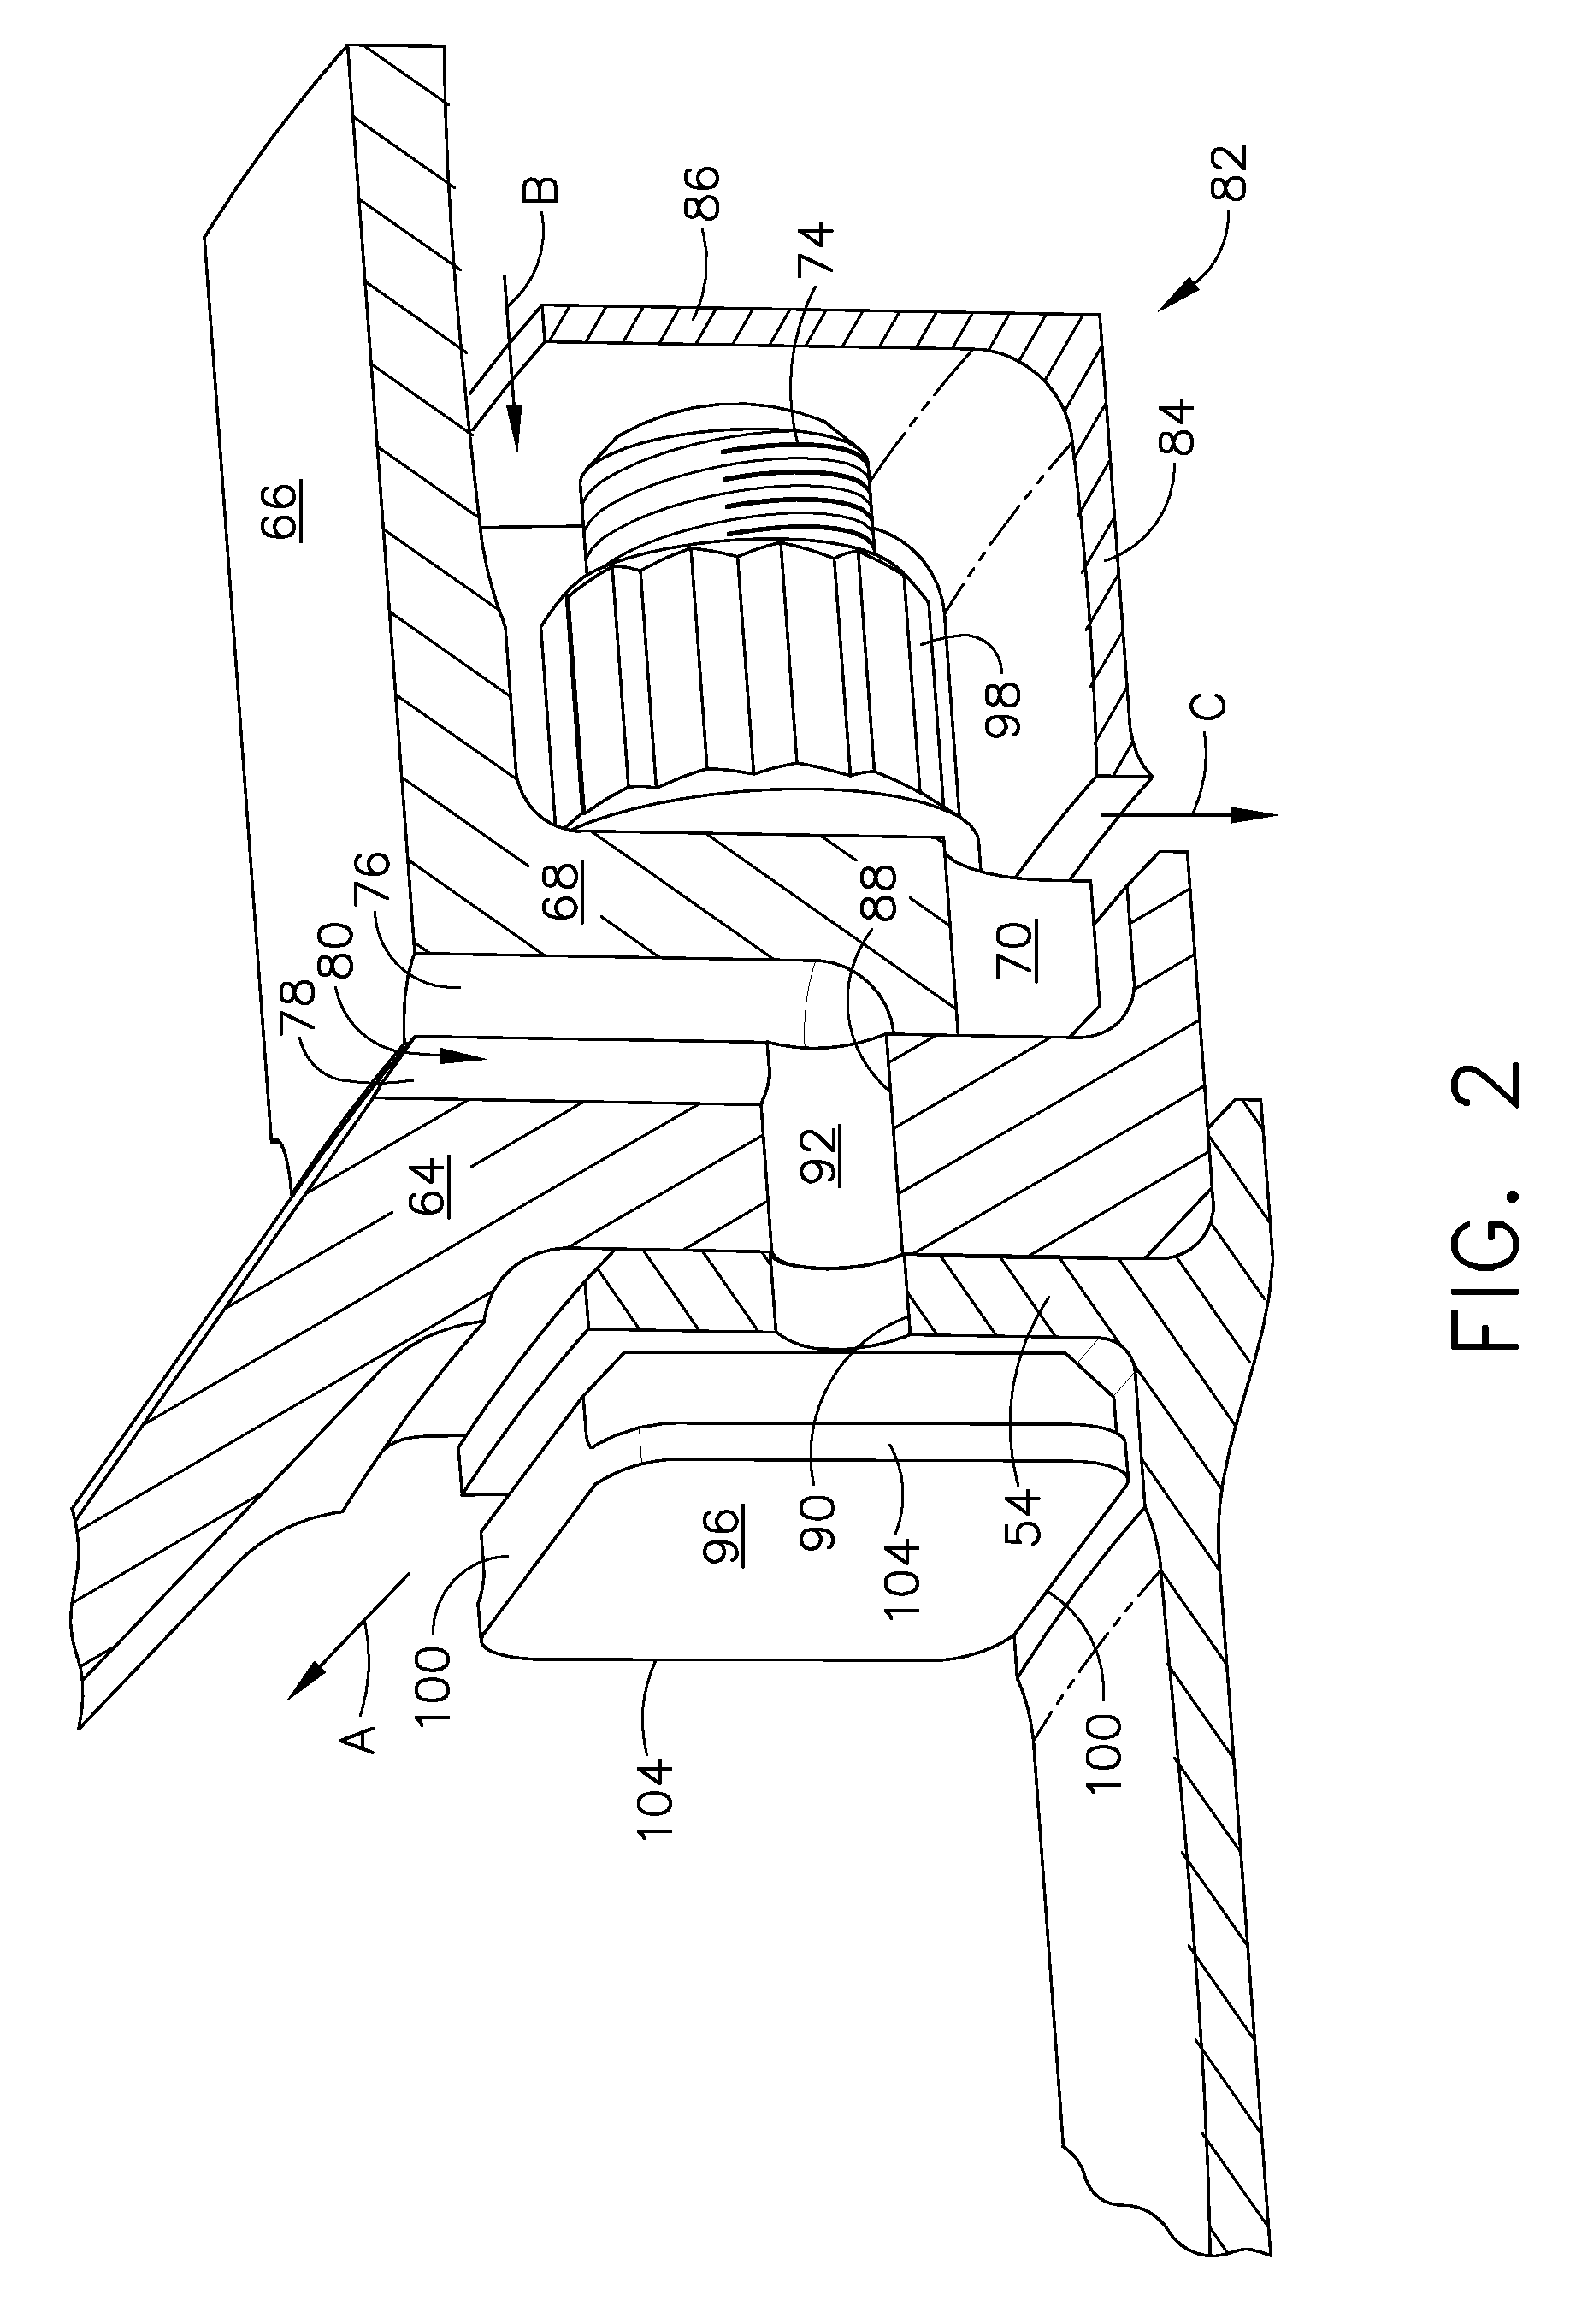 Mechanical joint for a gas turbine engine